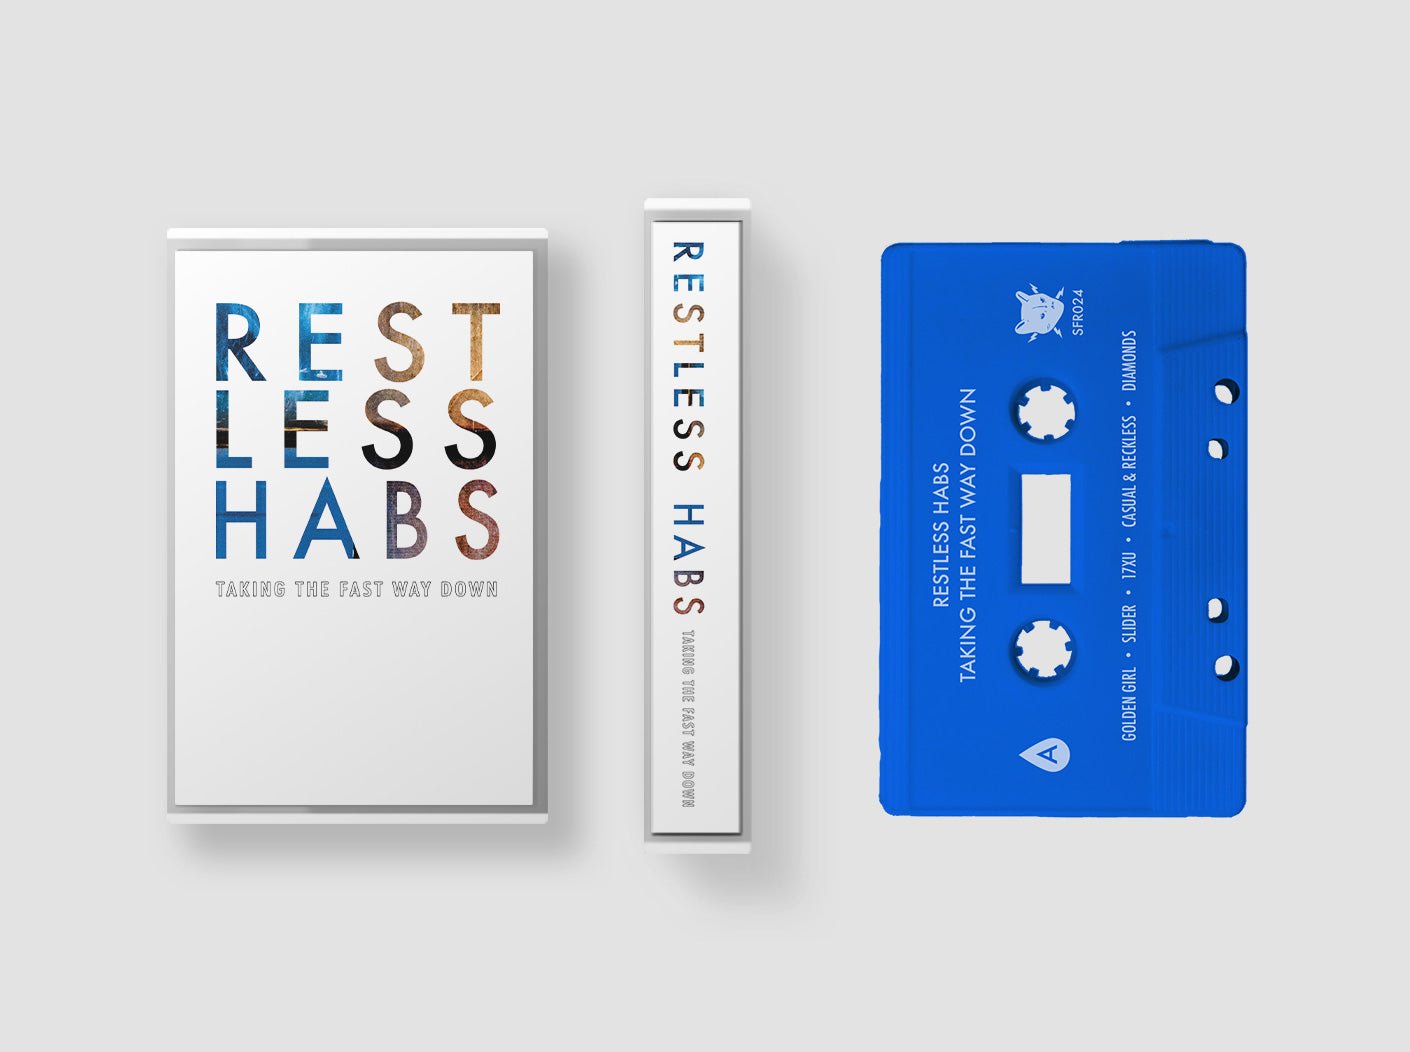 Restless Habs: Taking the Fast Way Down: Cassette - Steadfast Records